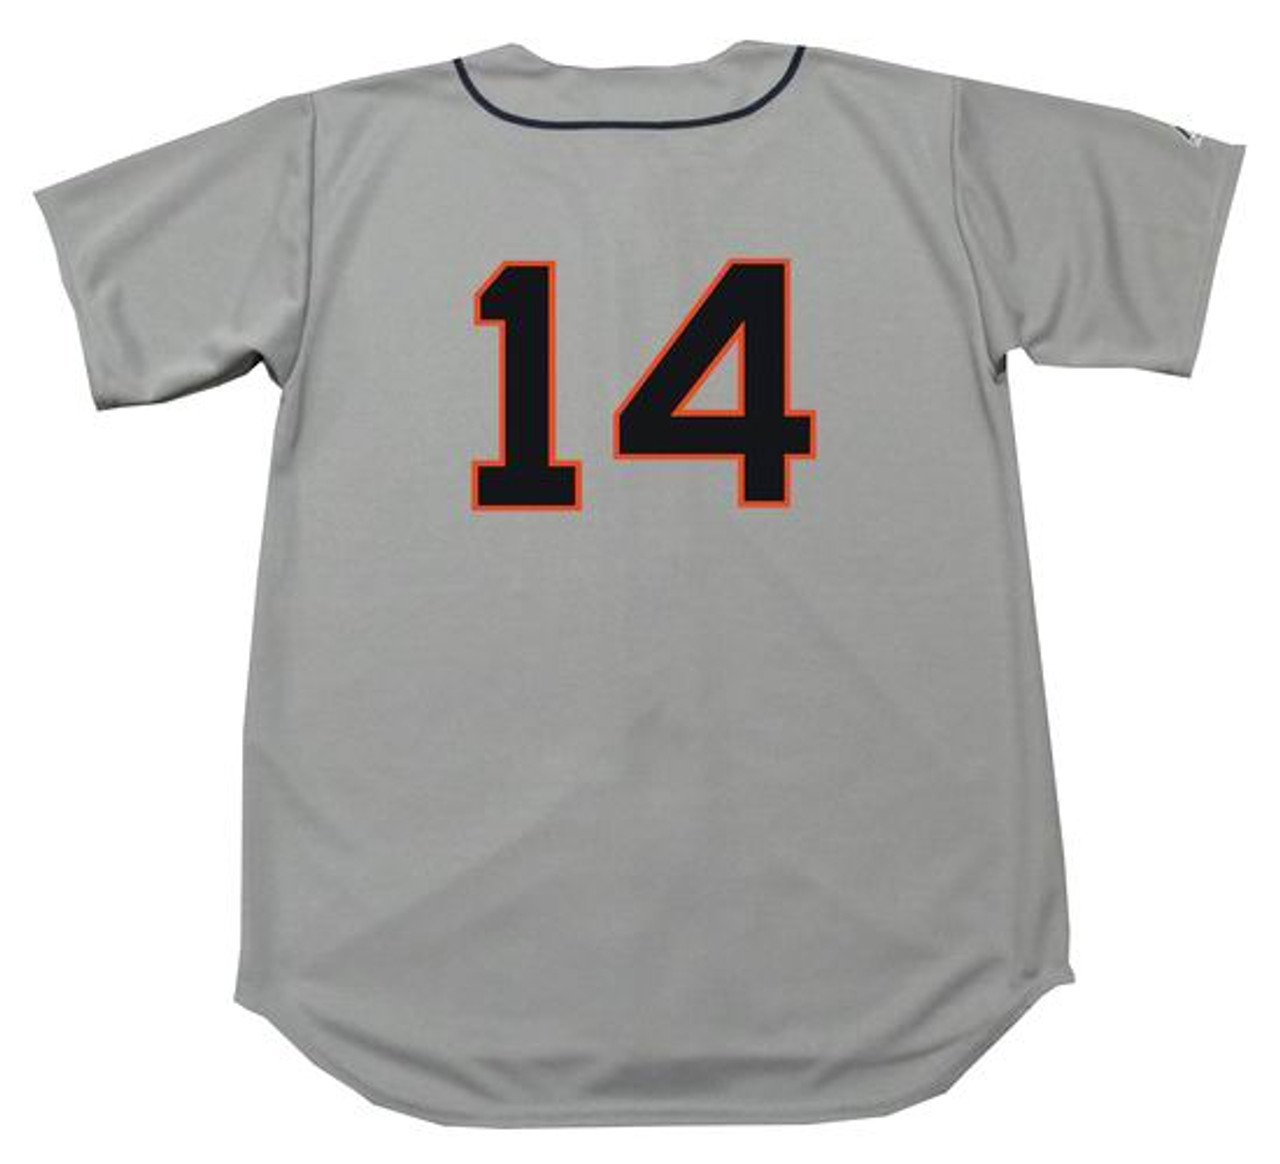 Cooperstown, Shirts, Cooperstown Detroit Tigers Jersey